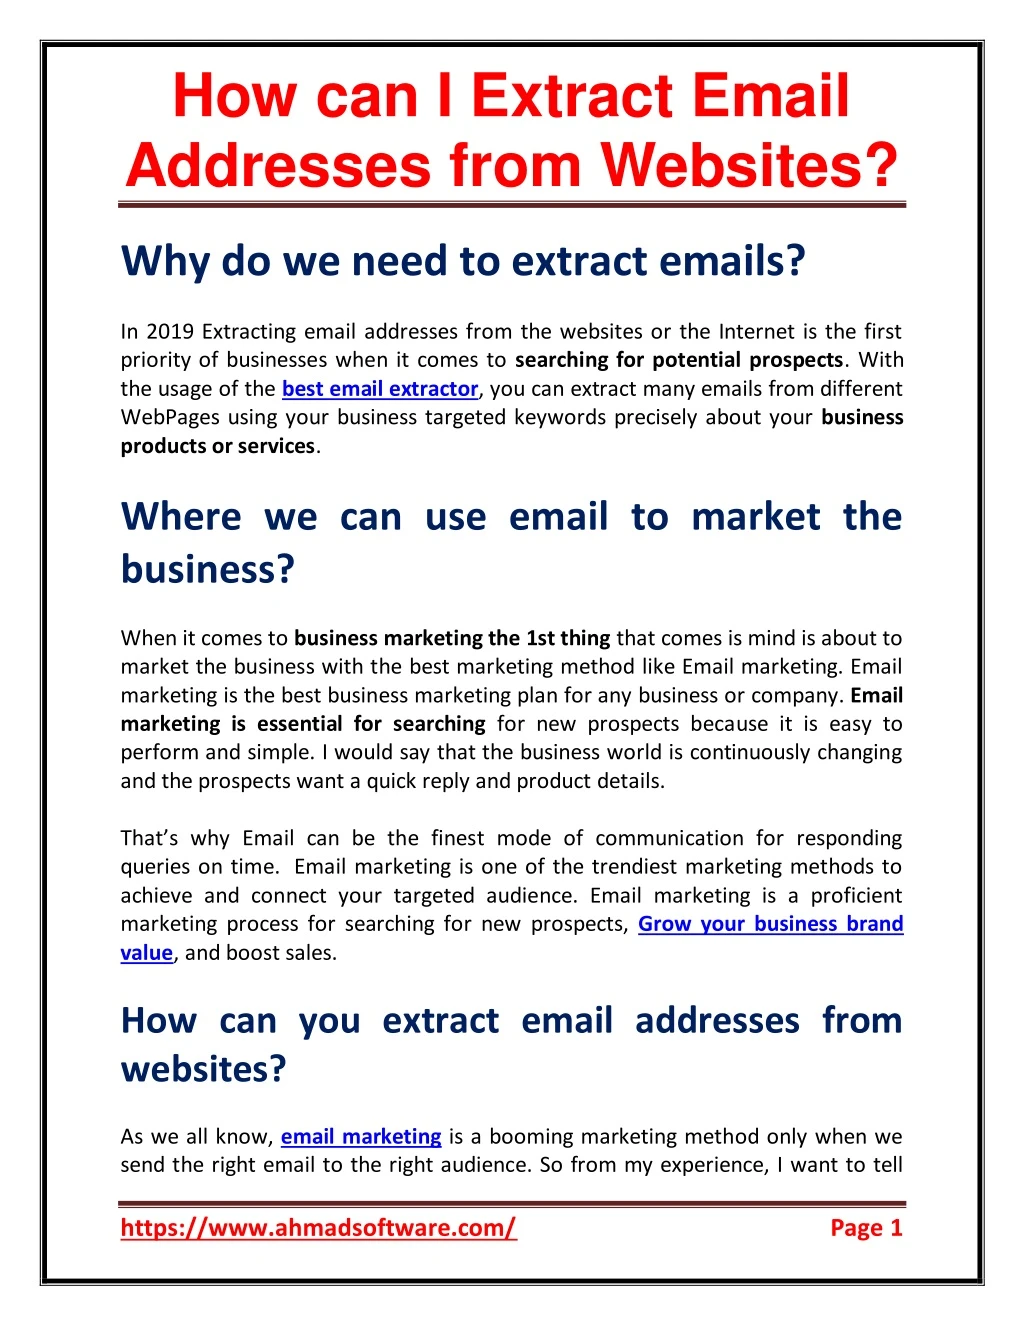 how can i extract email addresses from websites